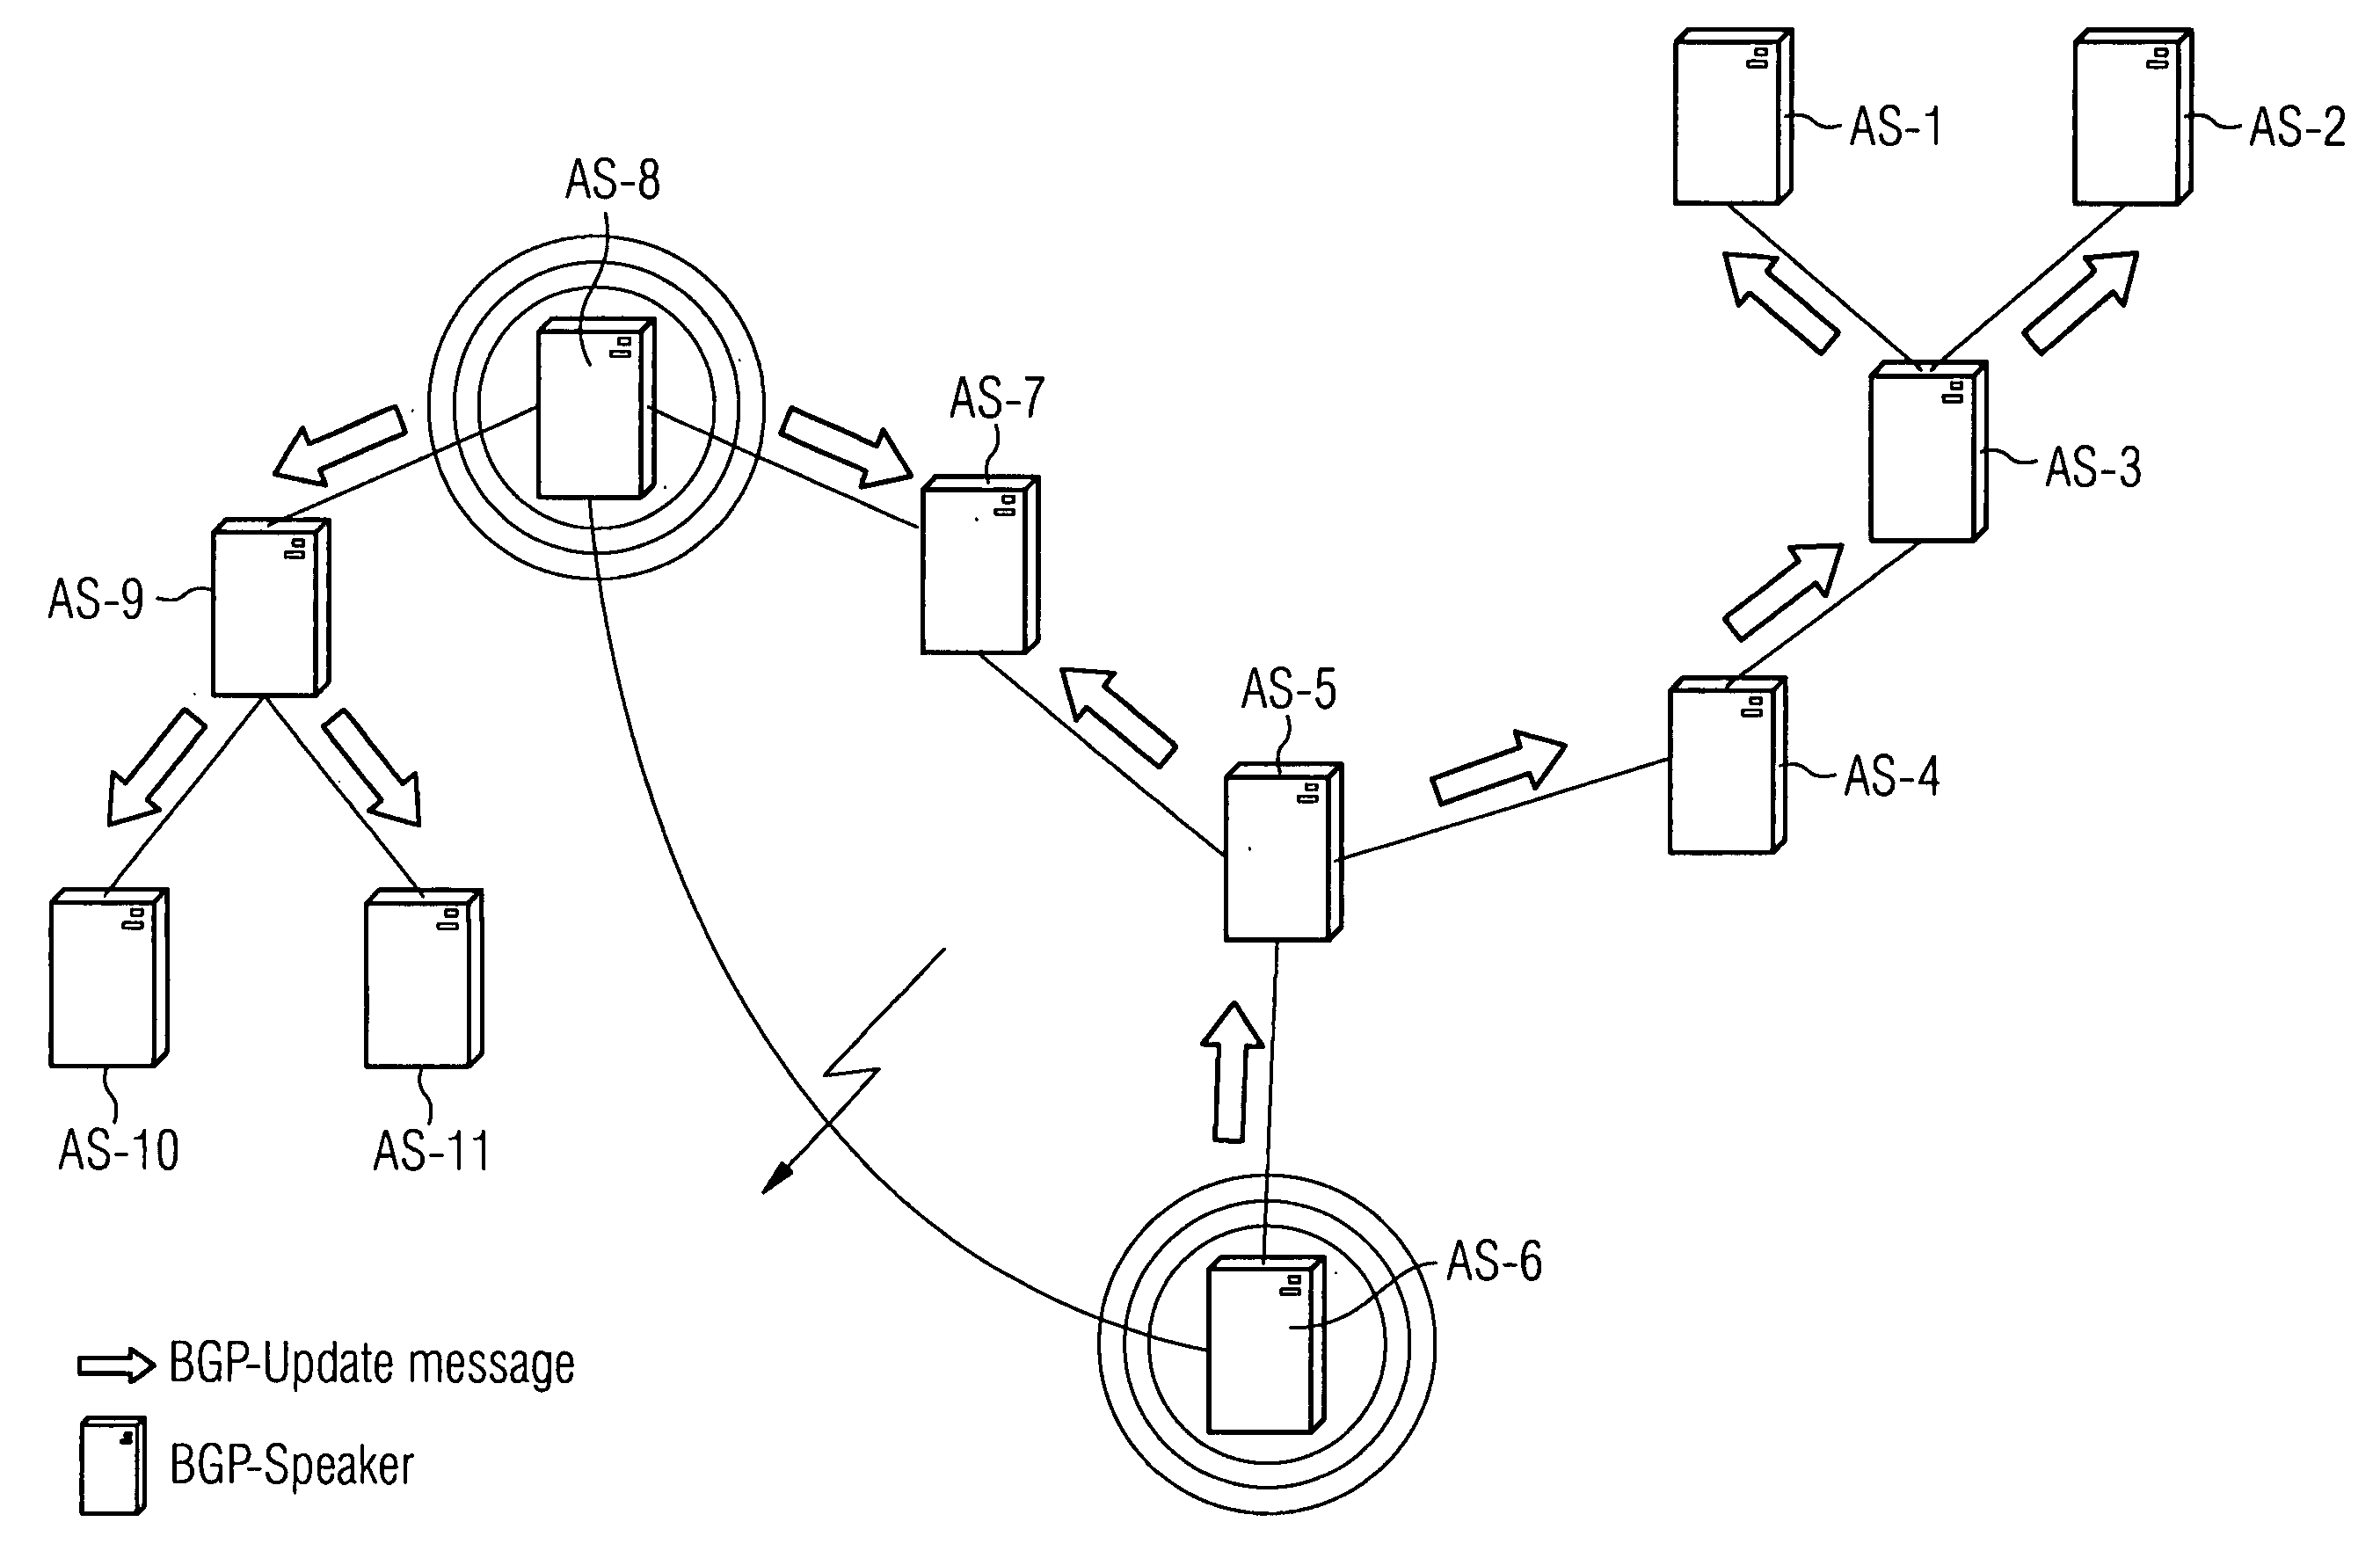 Rapid response method for the failure of links between different routing domains